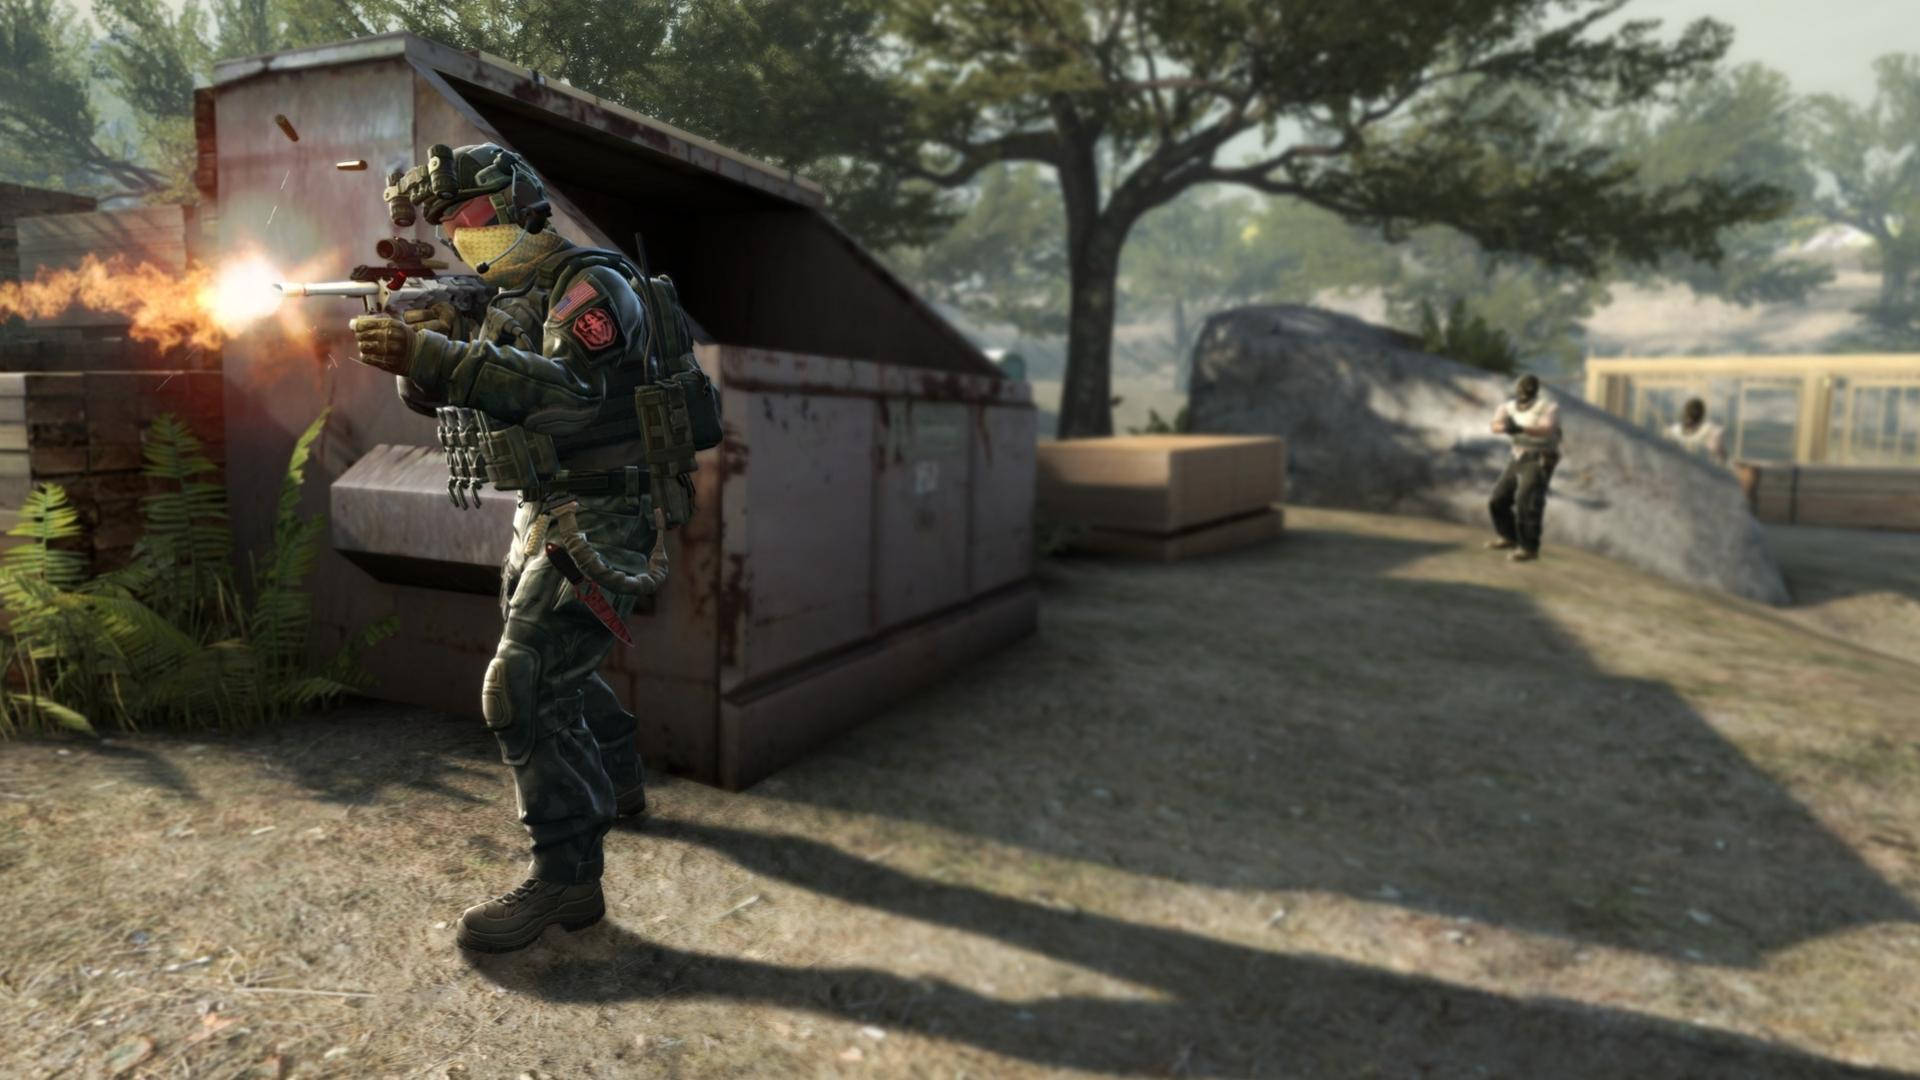 Unseen Action Behind The Dumpster In Counter-strike: Global Offensive